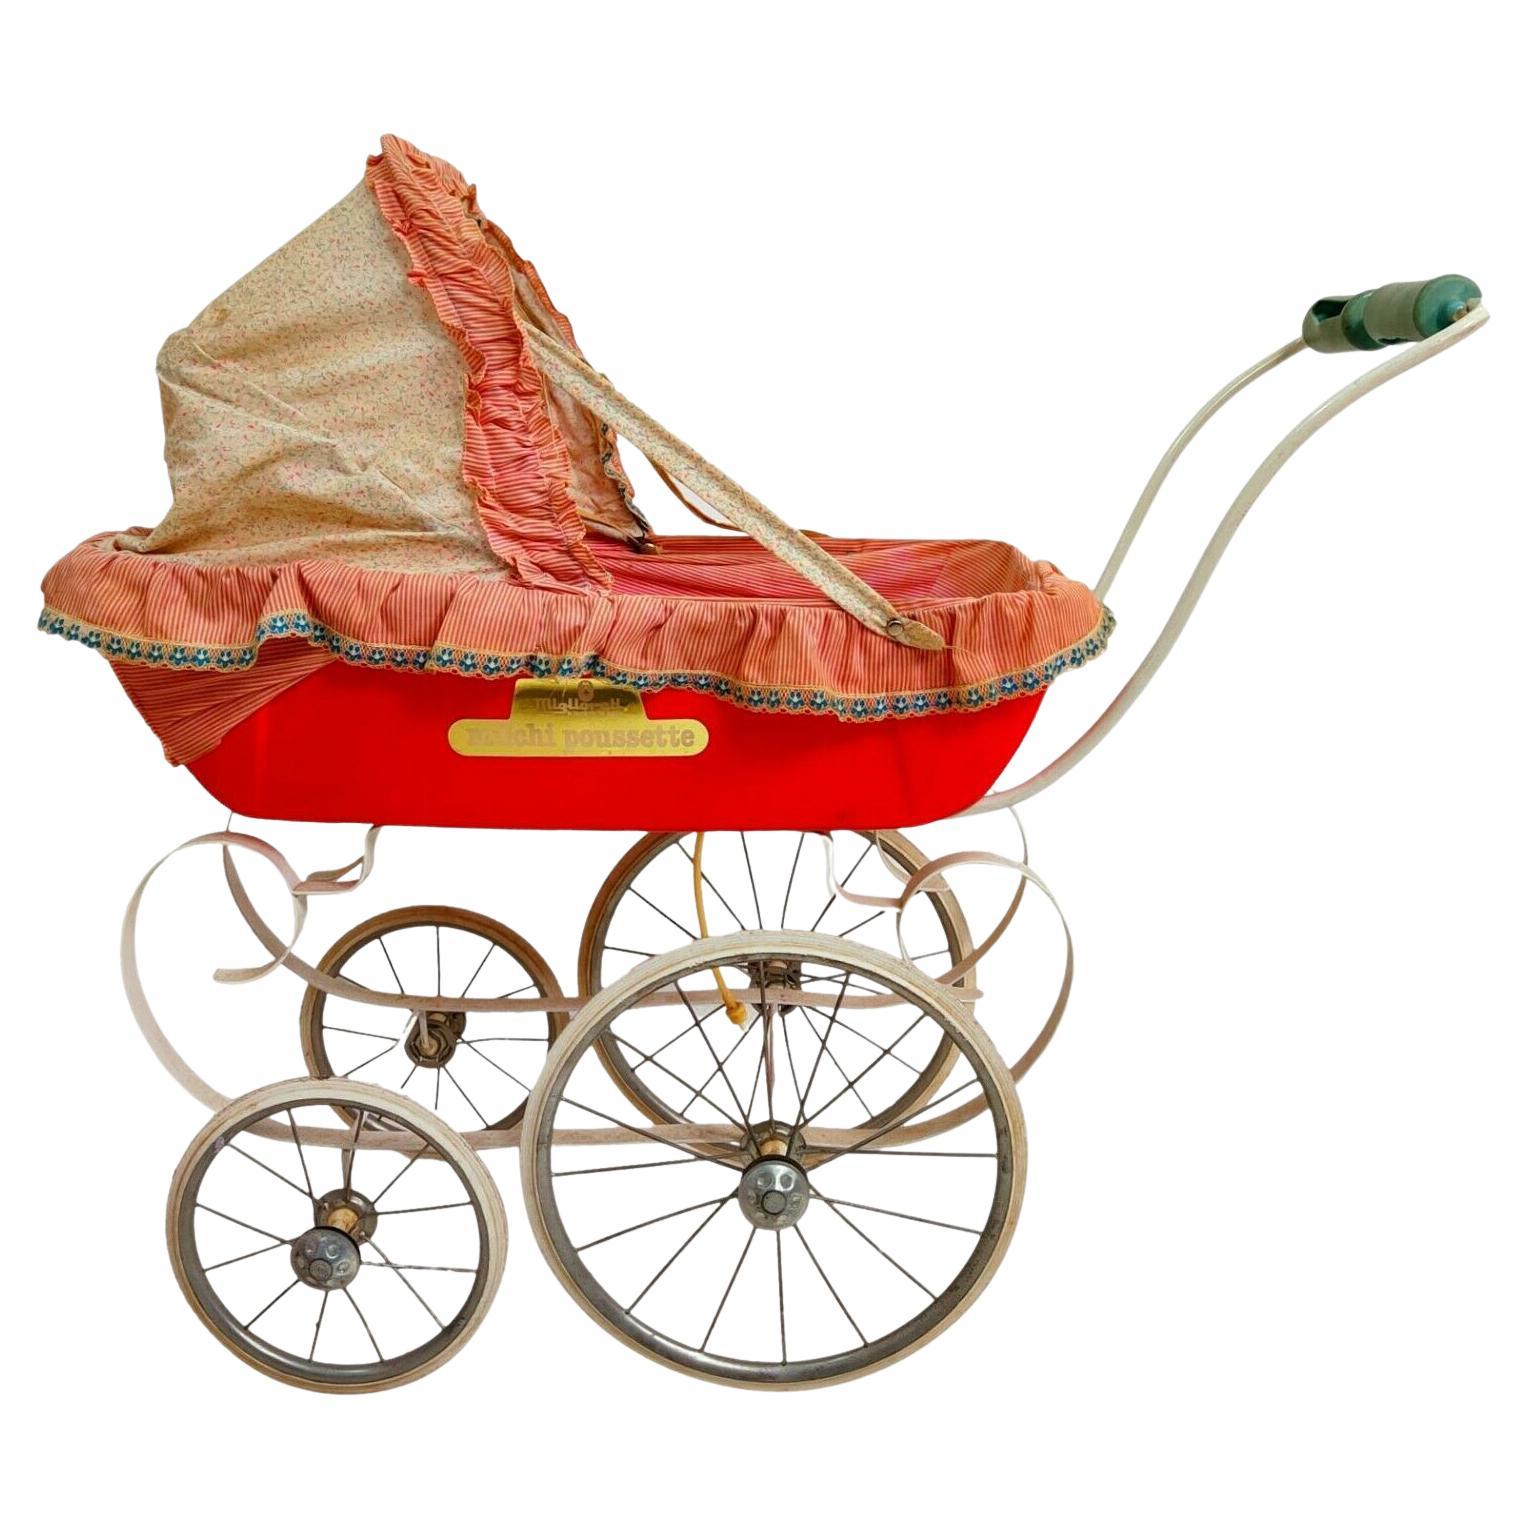 Vintage Stroller "Milchi Poussette" Series by Migliorati, 1979 For Sale